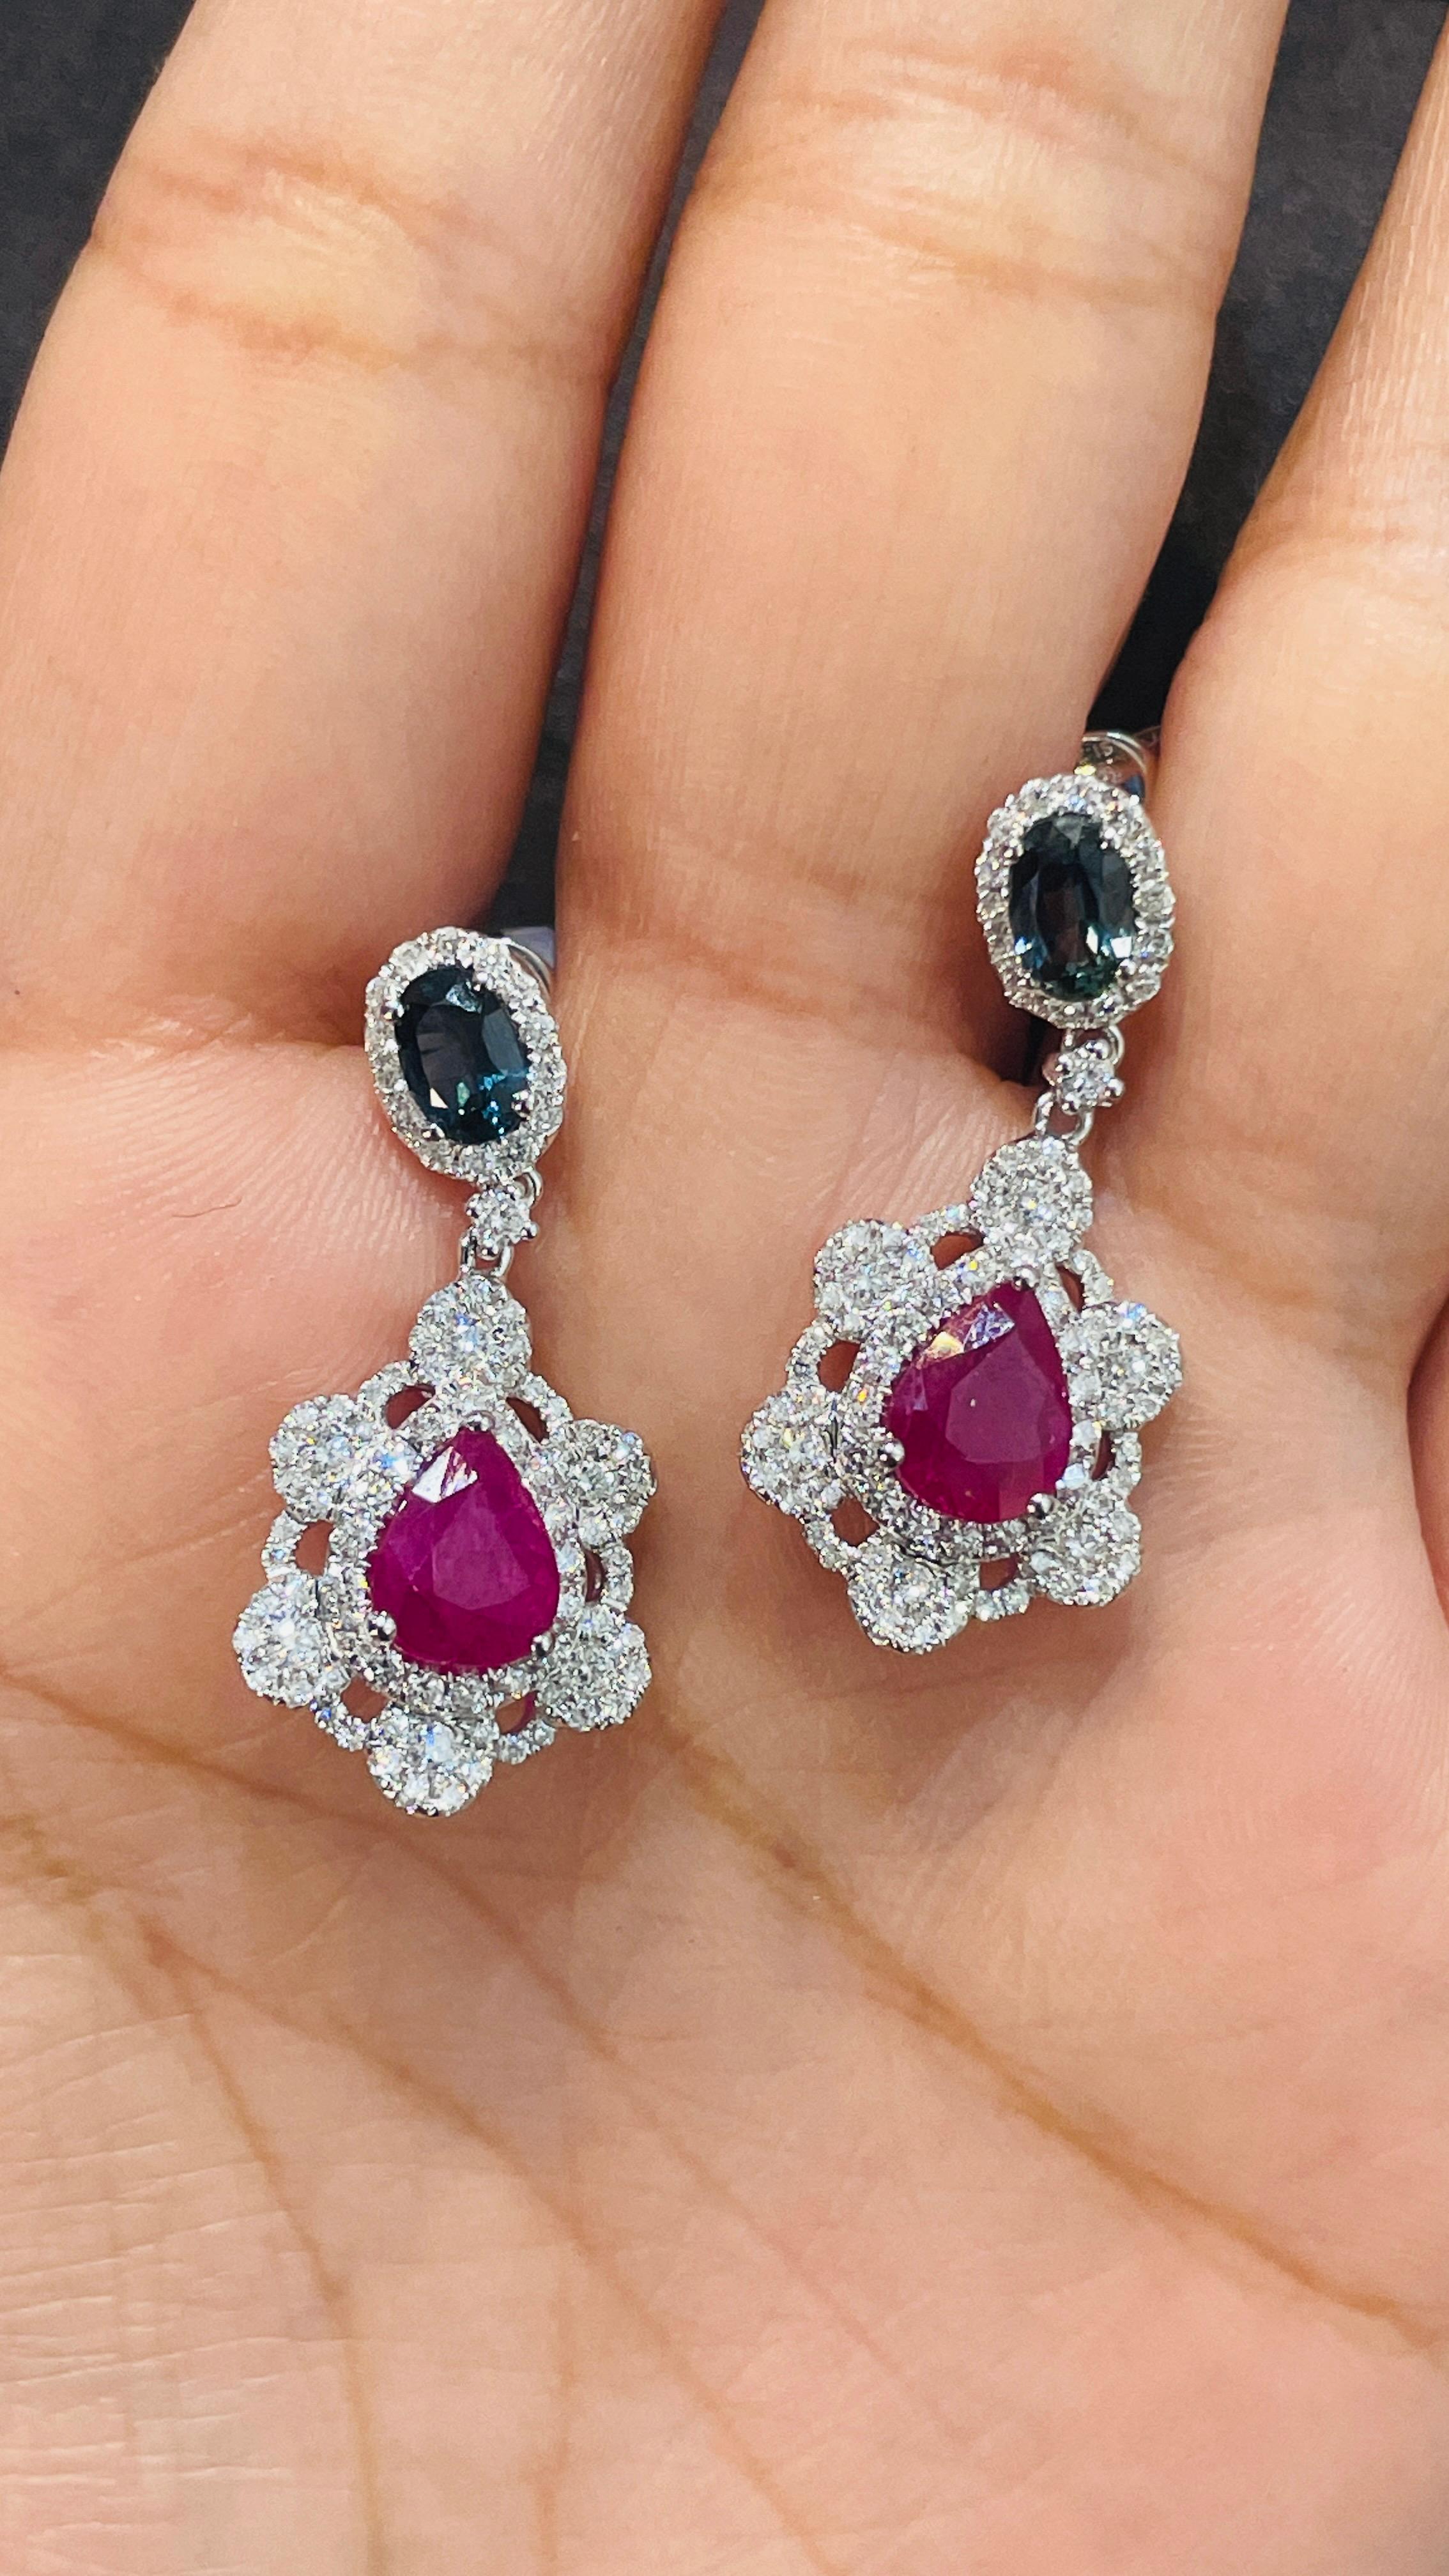 Ruby and Blue Sapphire Dangle earrings to make a statement with your look. These earrings create a sparkling, luxurious look featuring oval and pear cut gemstone.
If you love to gravitate towards unique styles, this piece of jewelry is perfect for